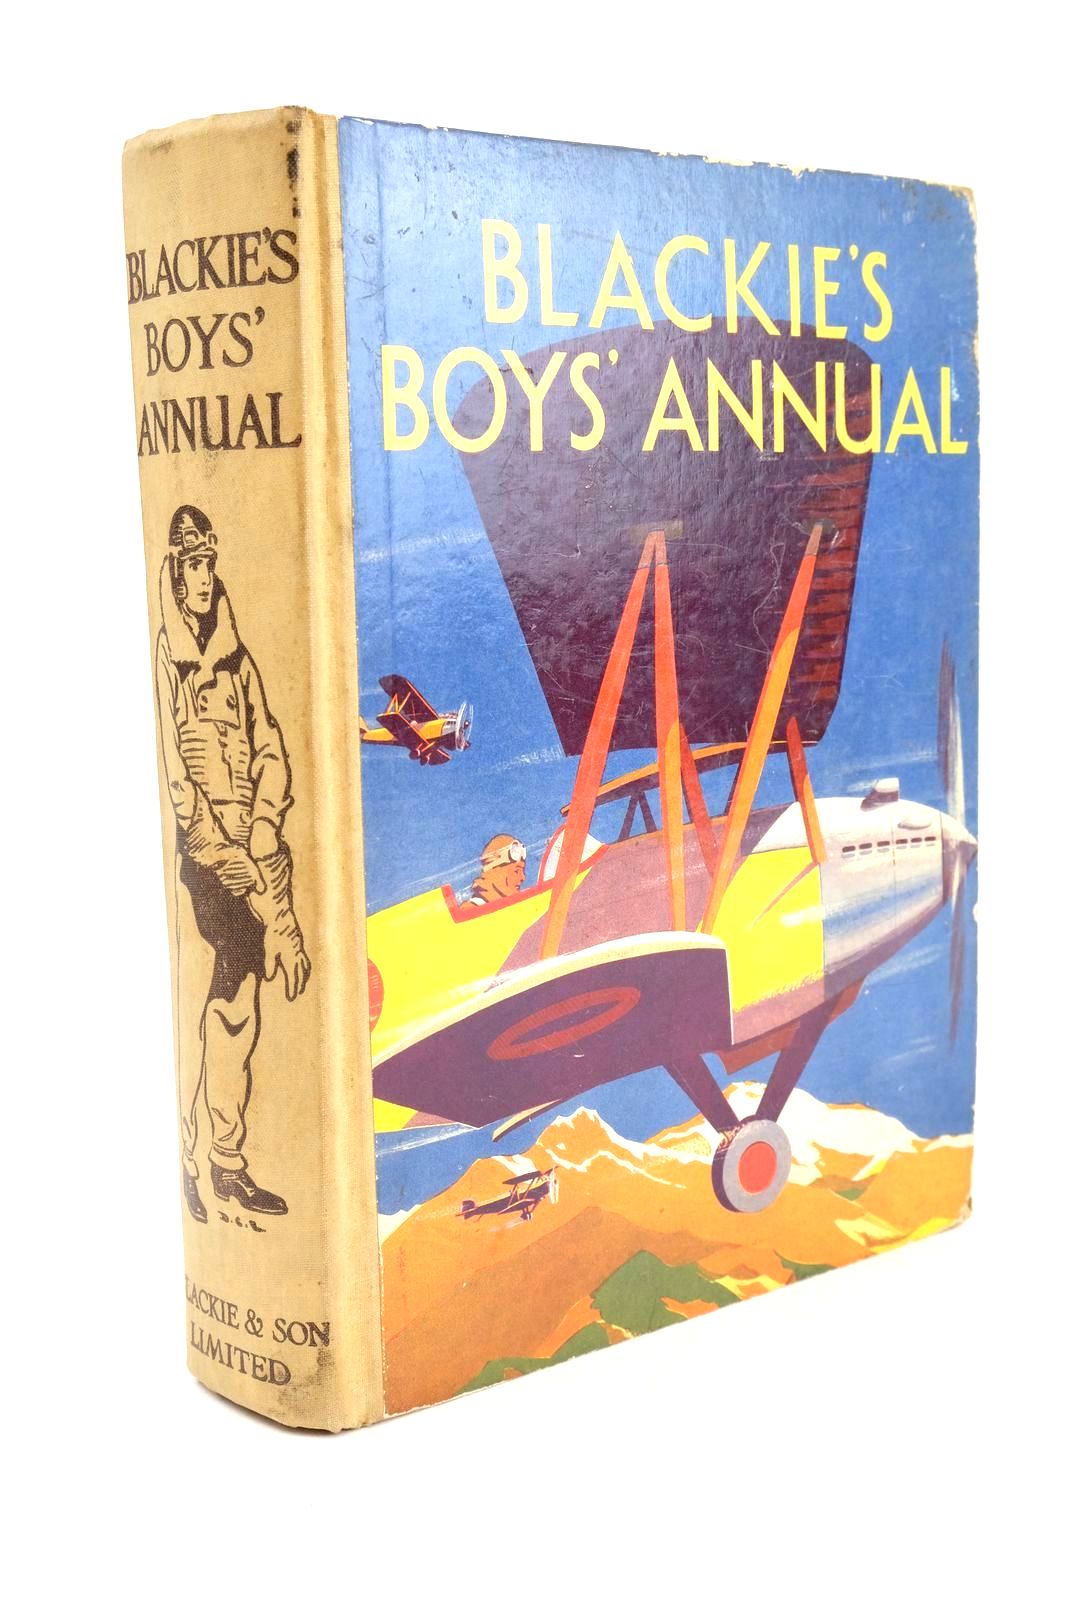 Photo of BLACKIE'S BOYS' ANNUAL written by Bird, Richard
Westerman, Percy F.
et al,  illustrated by Prater, Ernest
et al.,  published by Blackie & Son Ltd. (STOCK CODE: 1325093)  for sale by Stella & Rose's Books